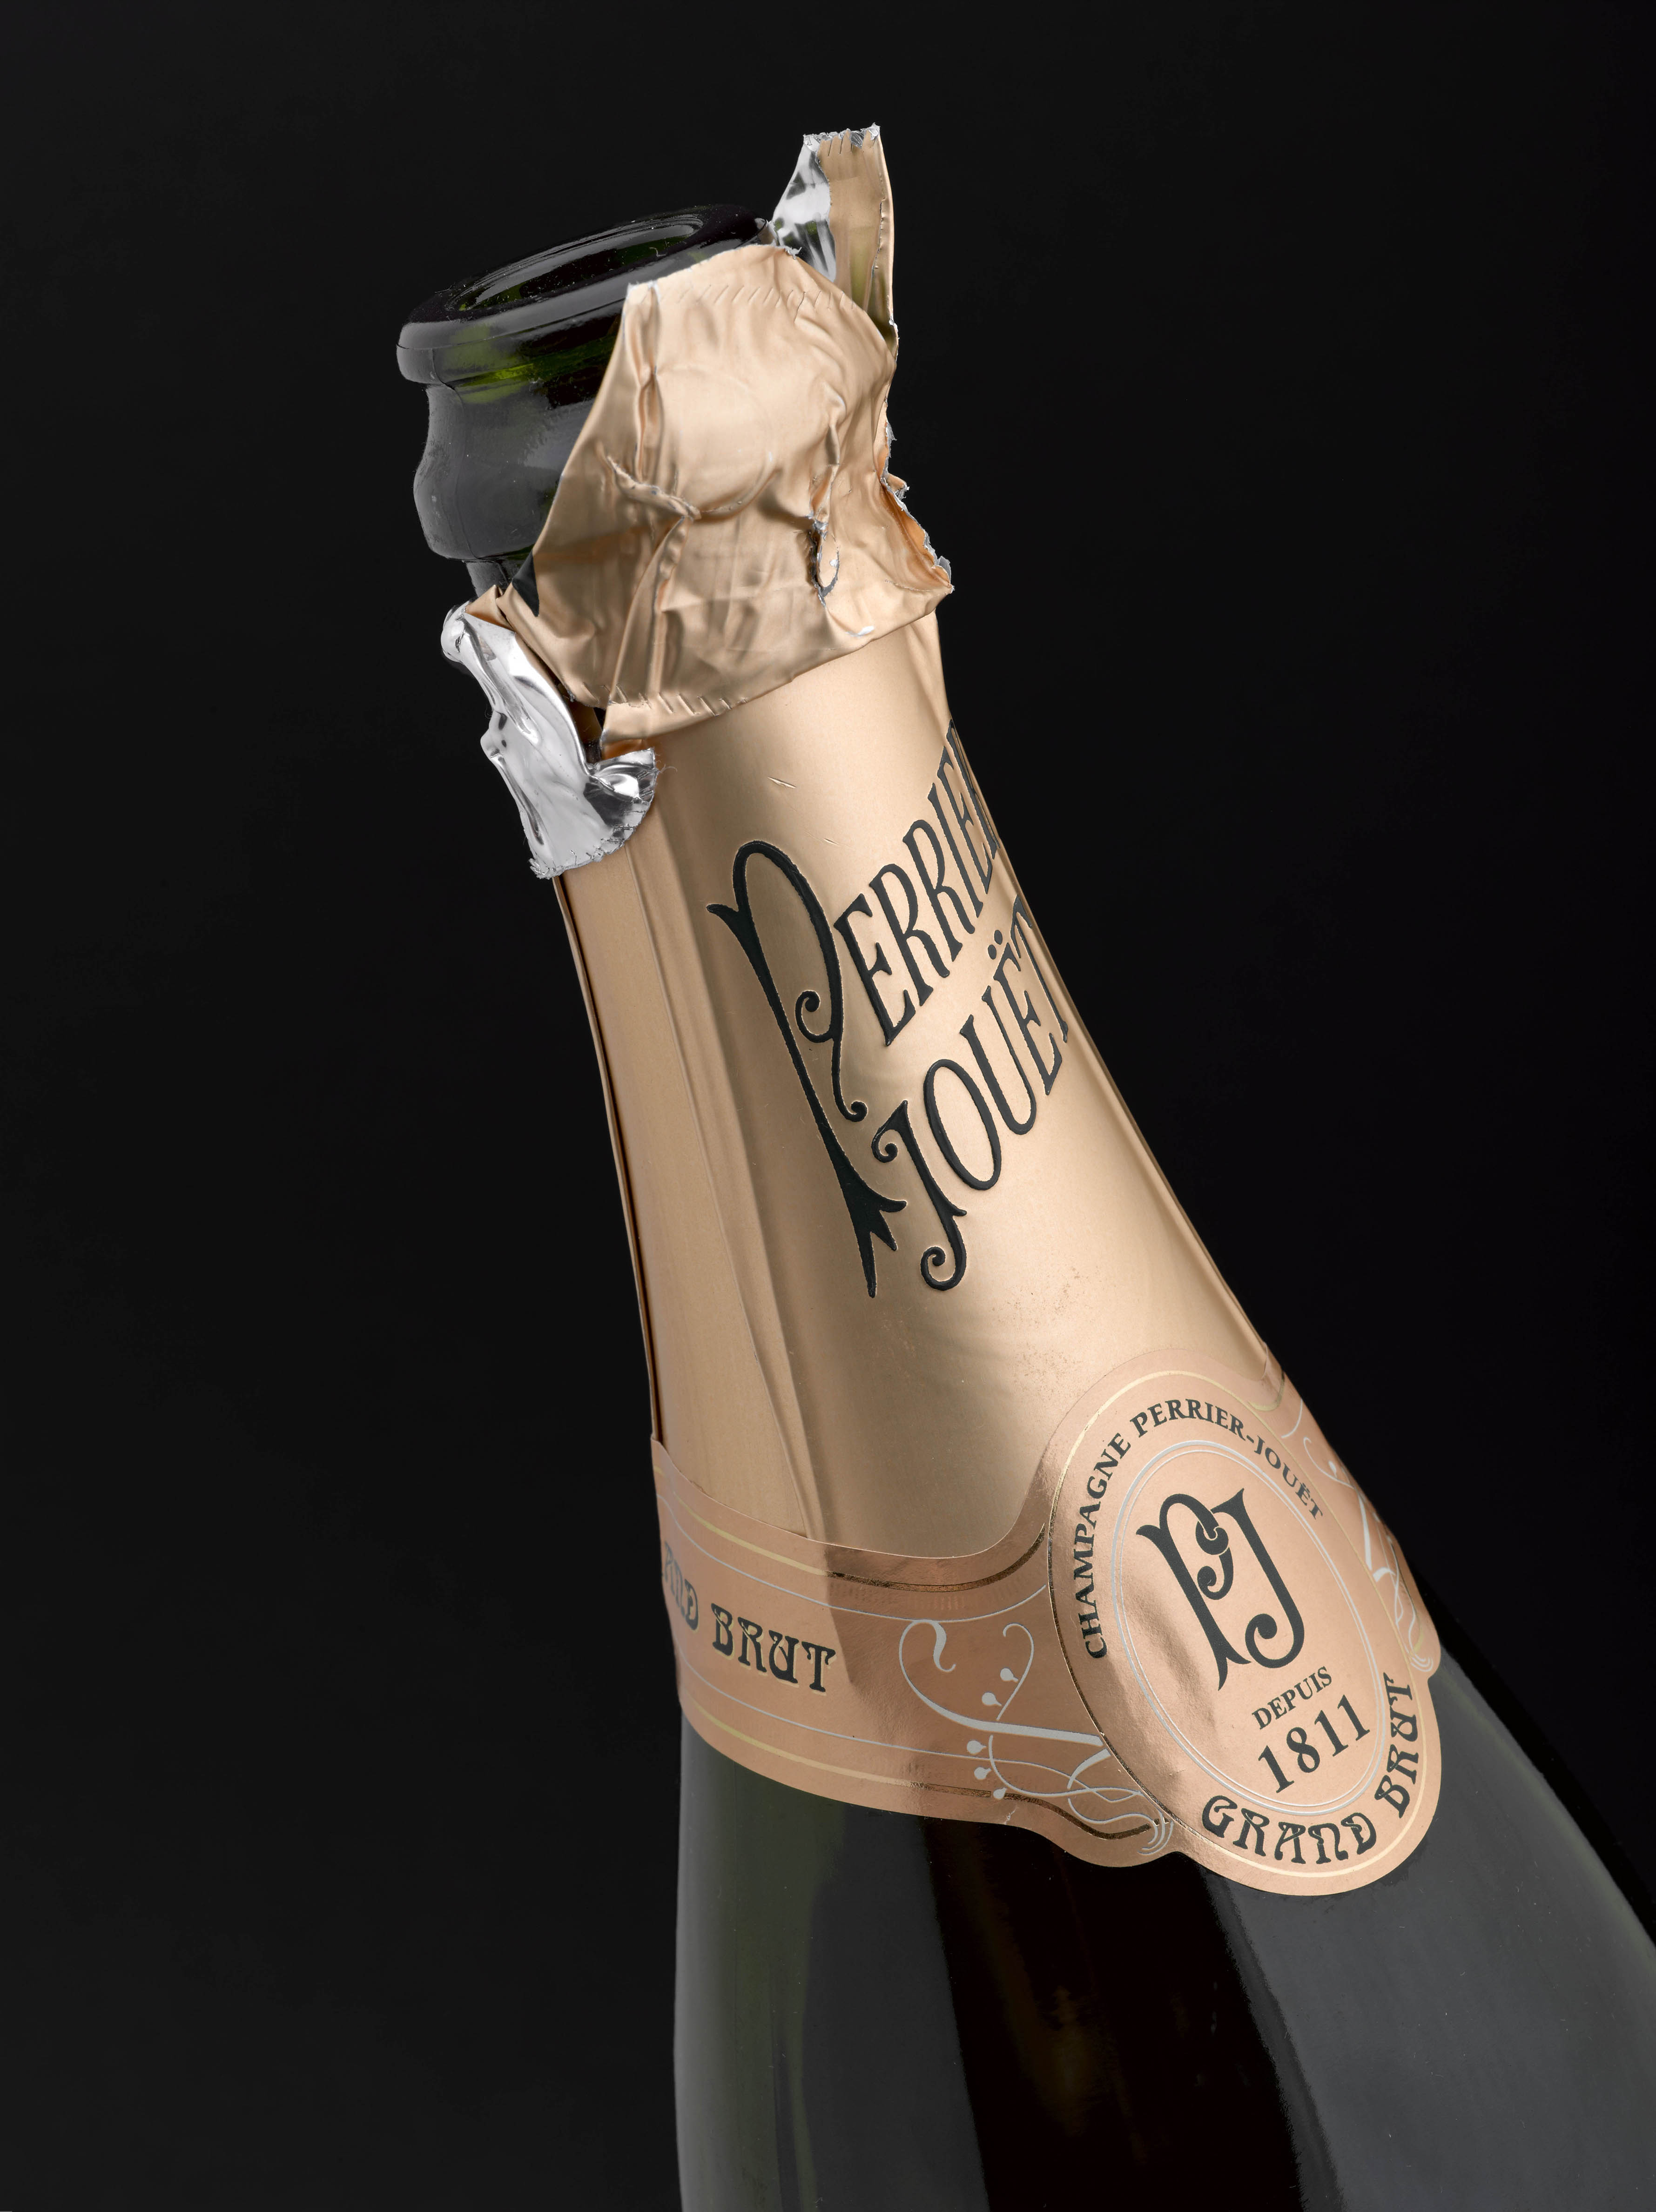 The champagne bottle Peter Higgs drank from, the night before the Higgs boson discovery was announced to the world. Credit: Science Museum